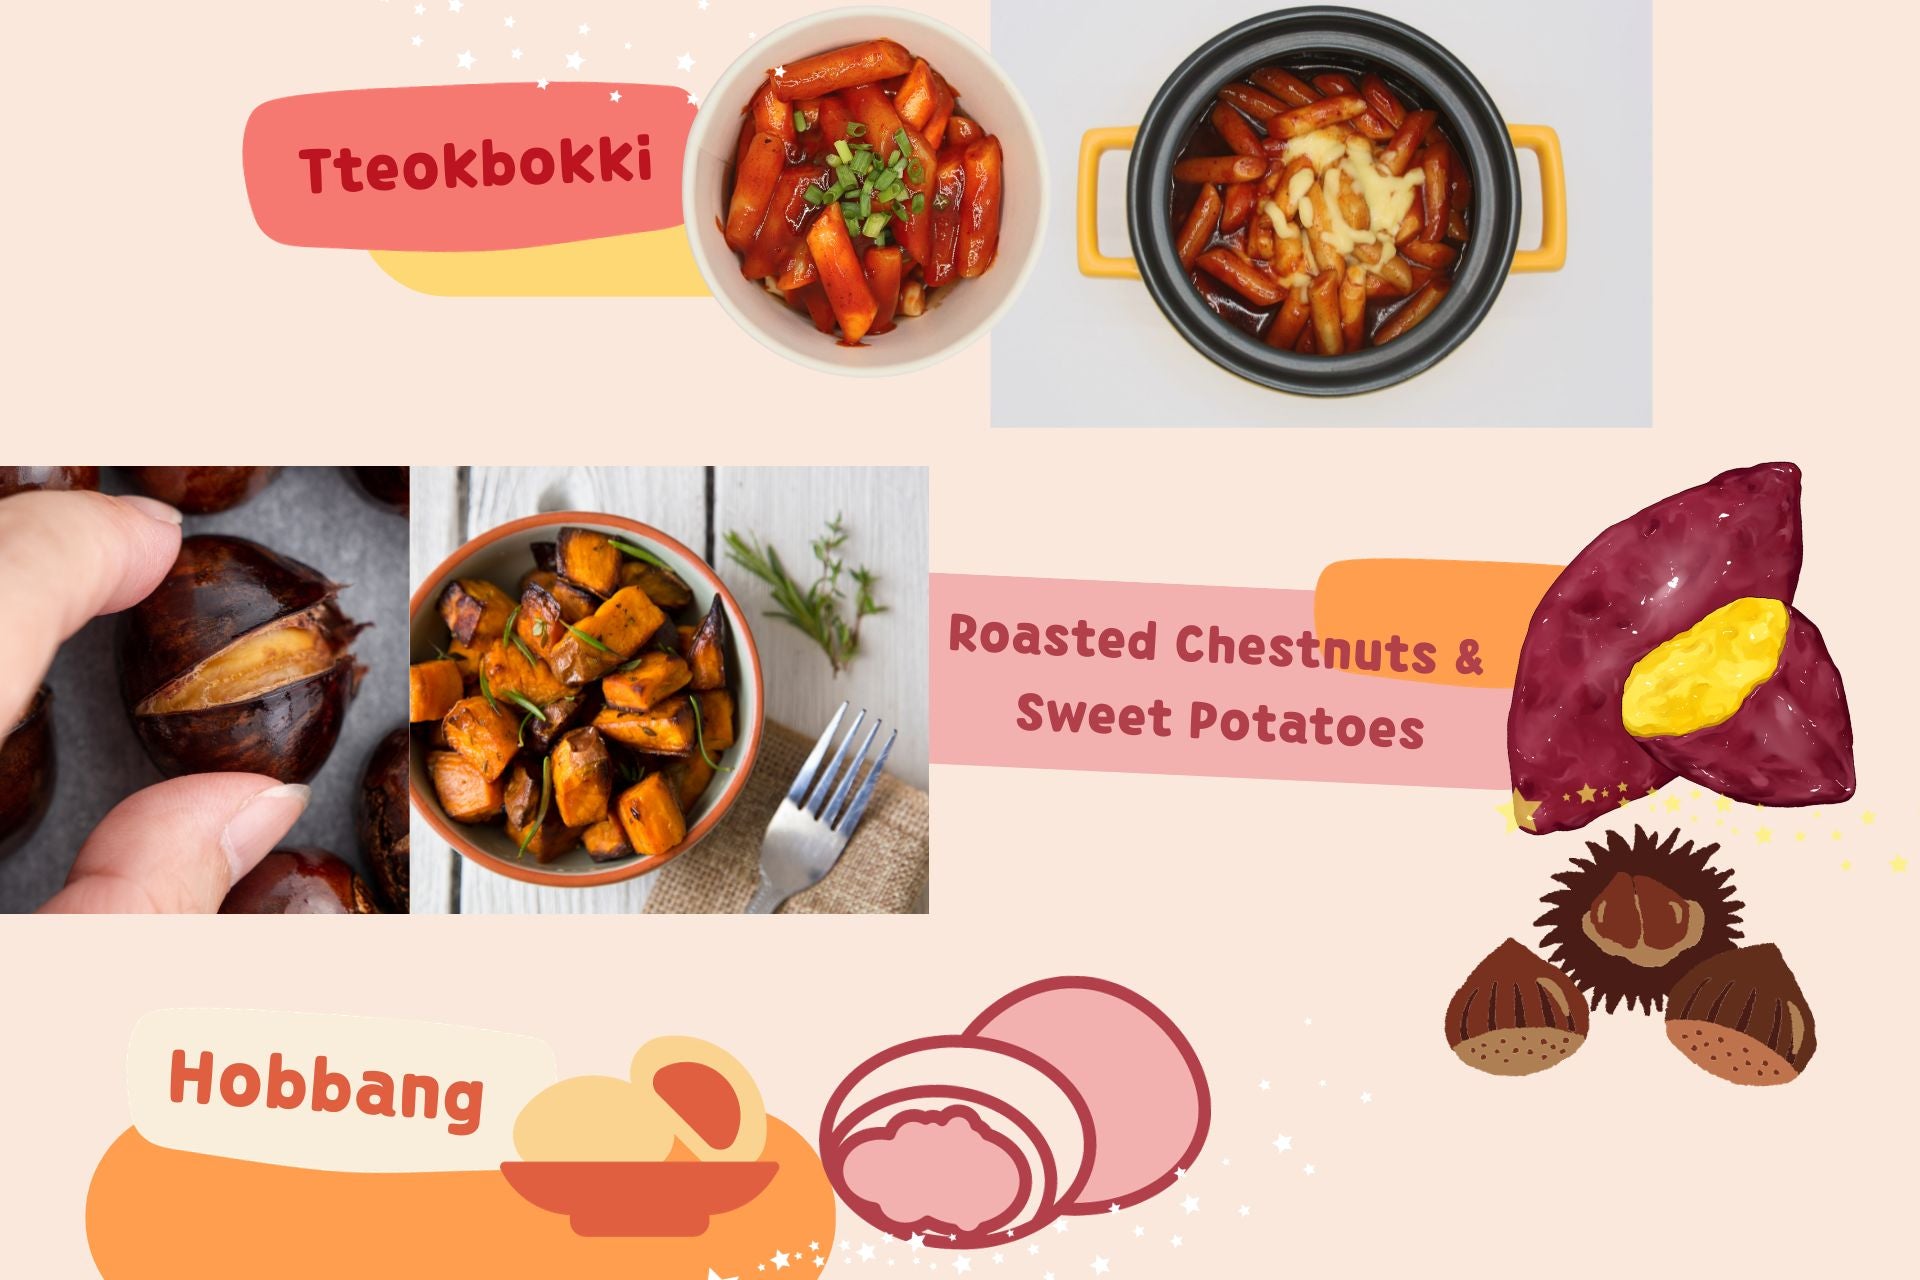 yopokki-Top-5-Korean-Winter-Snacks-to-Recommend-to-a-Foreign-Friend